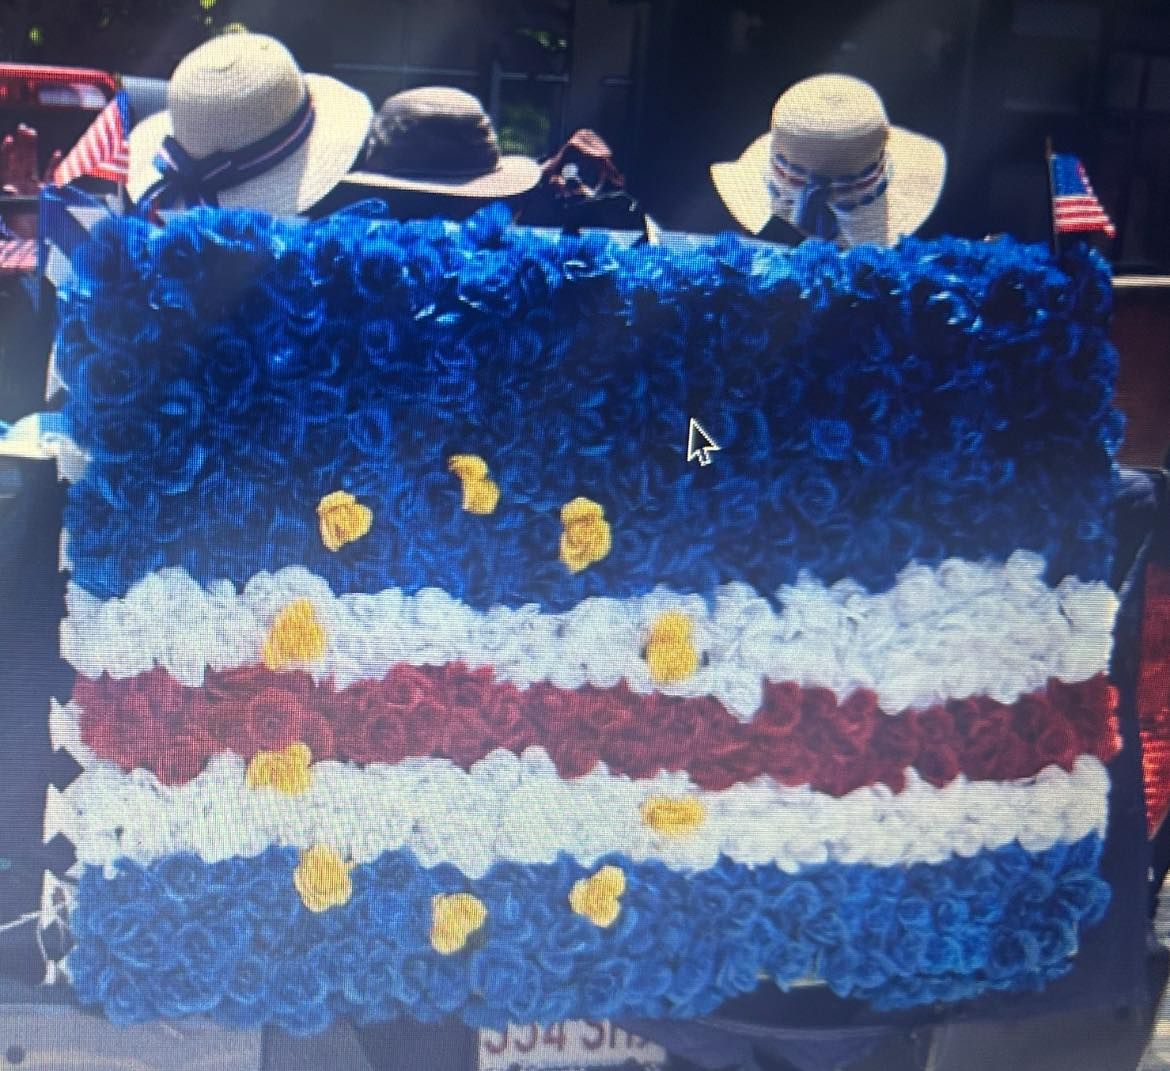 Pocket\/Greenhaven Parade has included Cape Verdeans of Sacramento to join the Parade